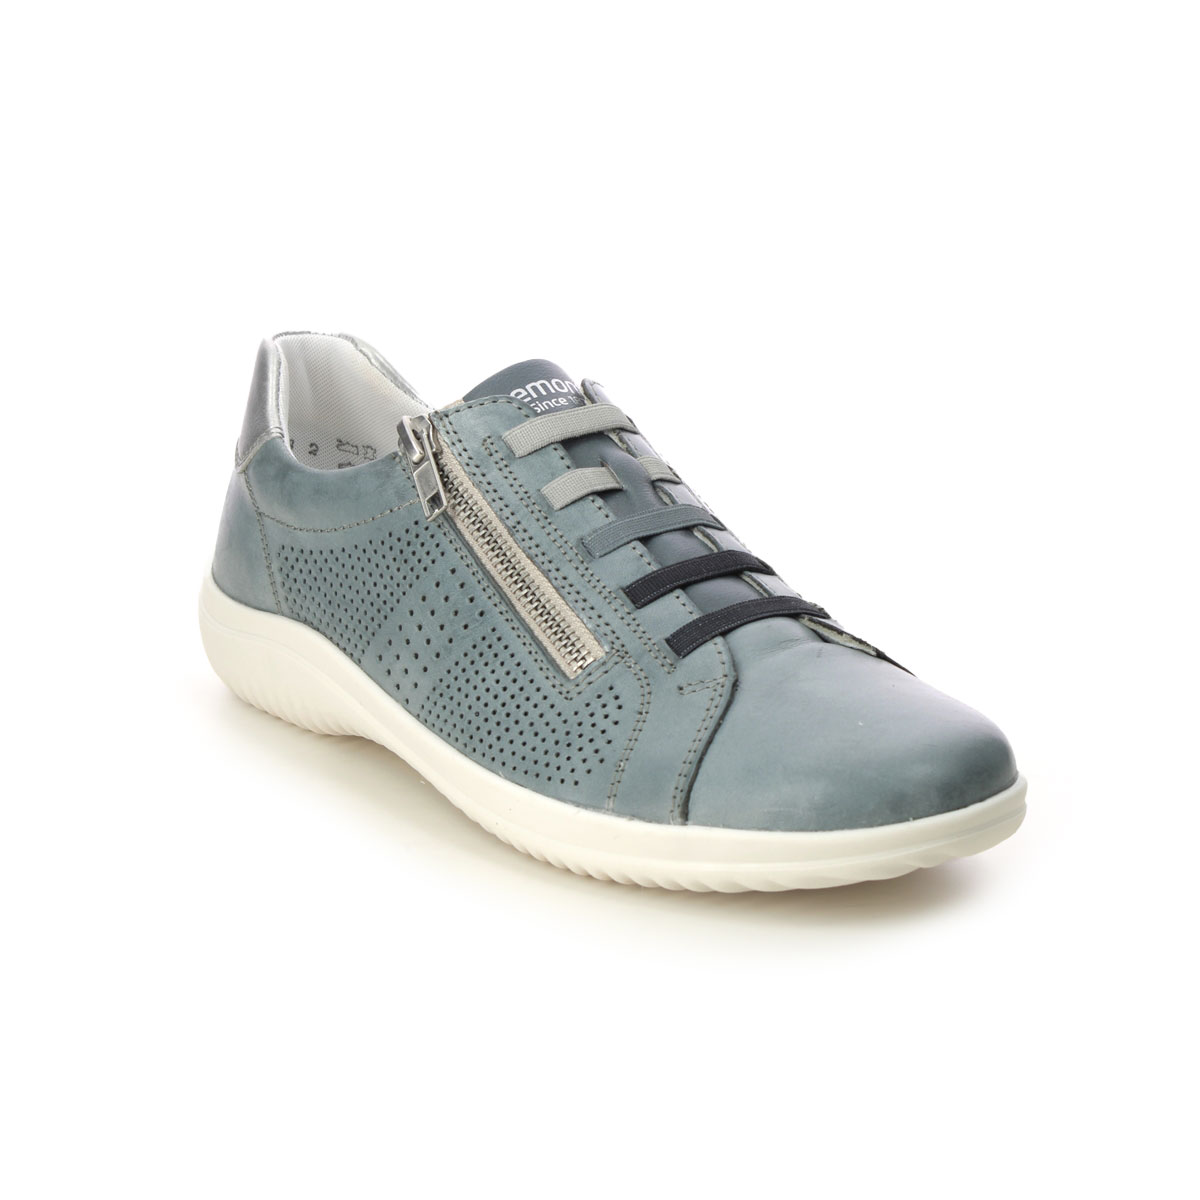 Remonte D1E02-14 Livonbungee Zip Denim leather Womens lacing shoes in a Plain Leather in Size 41